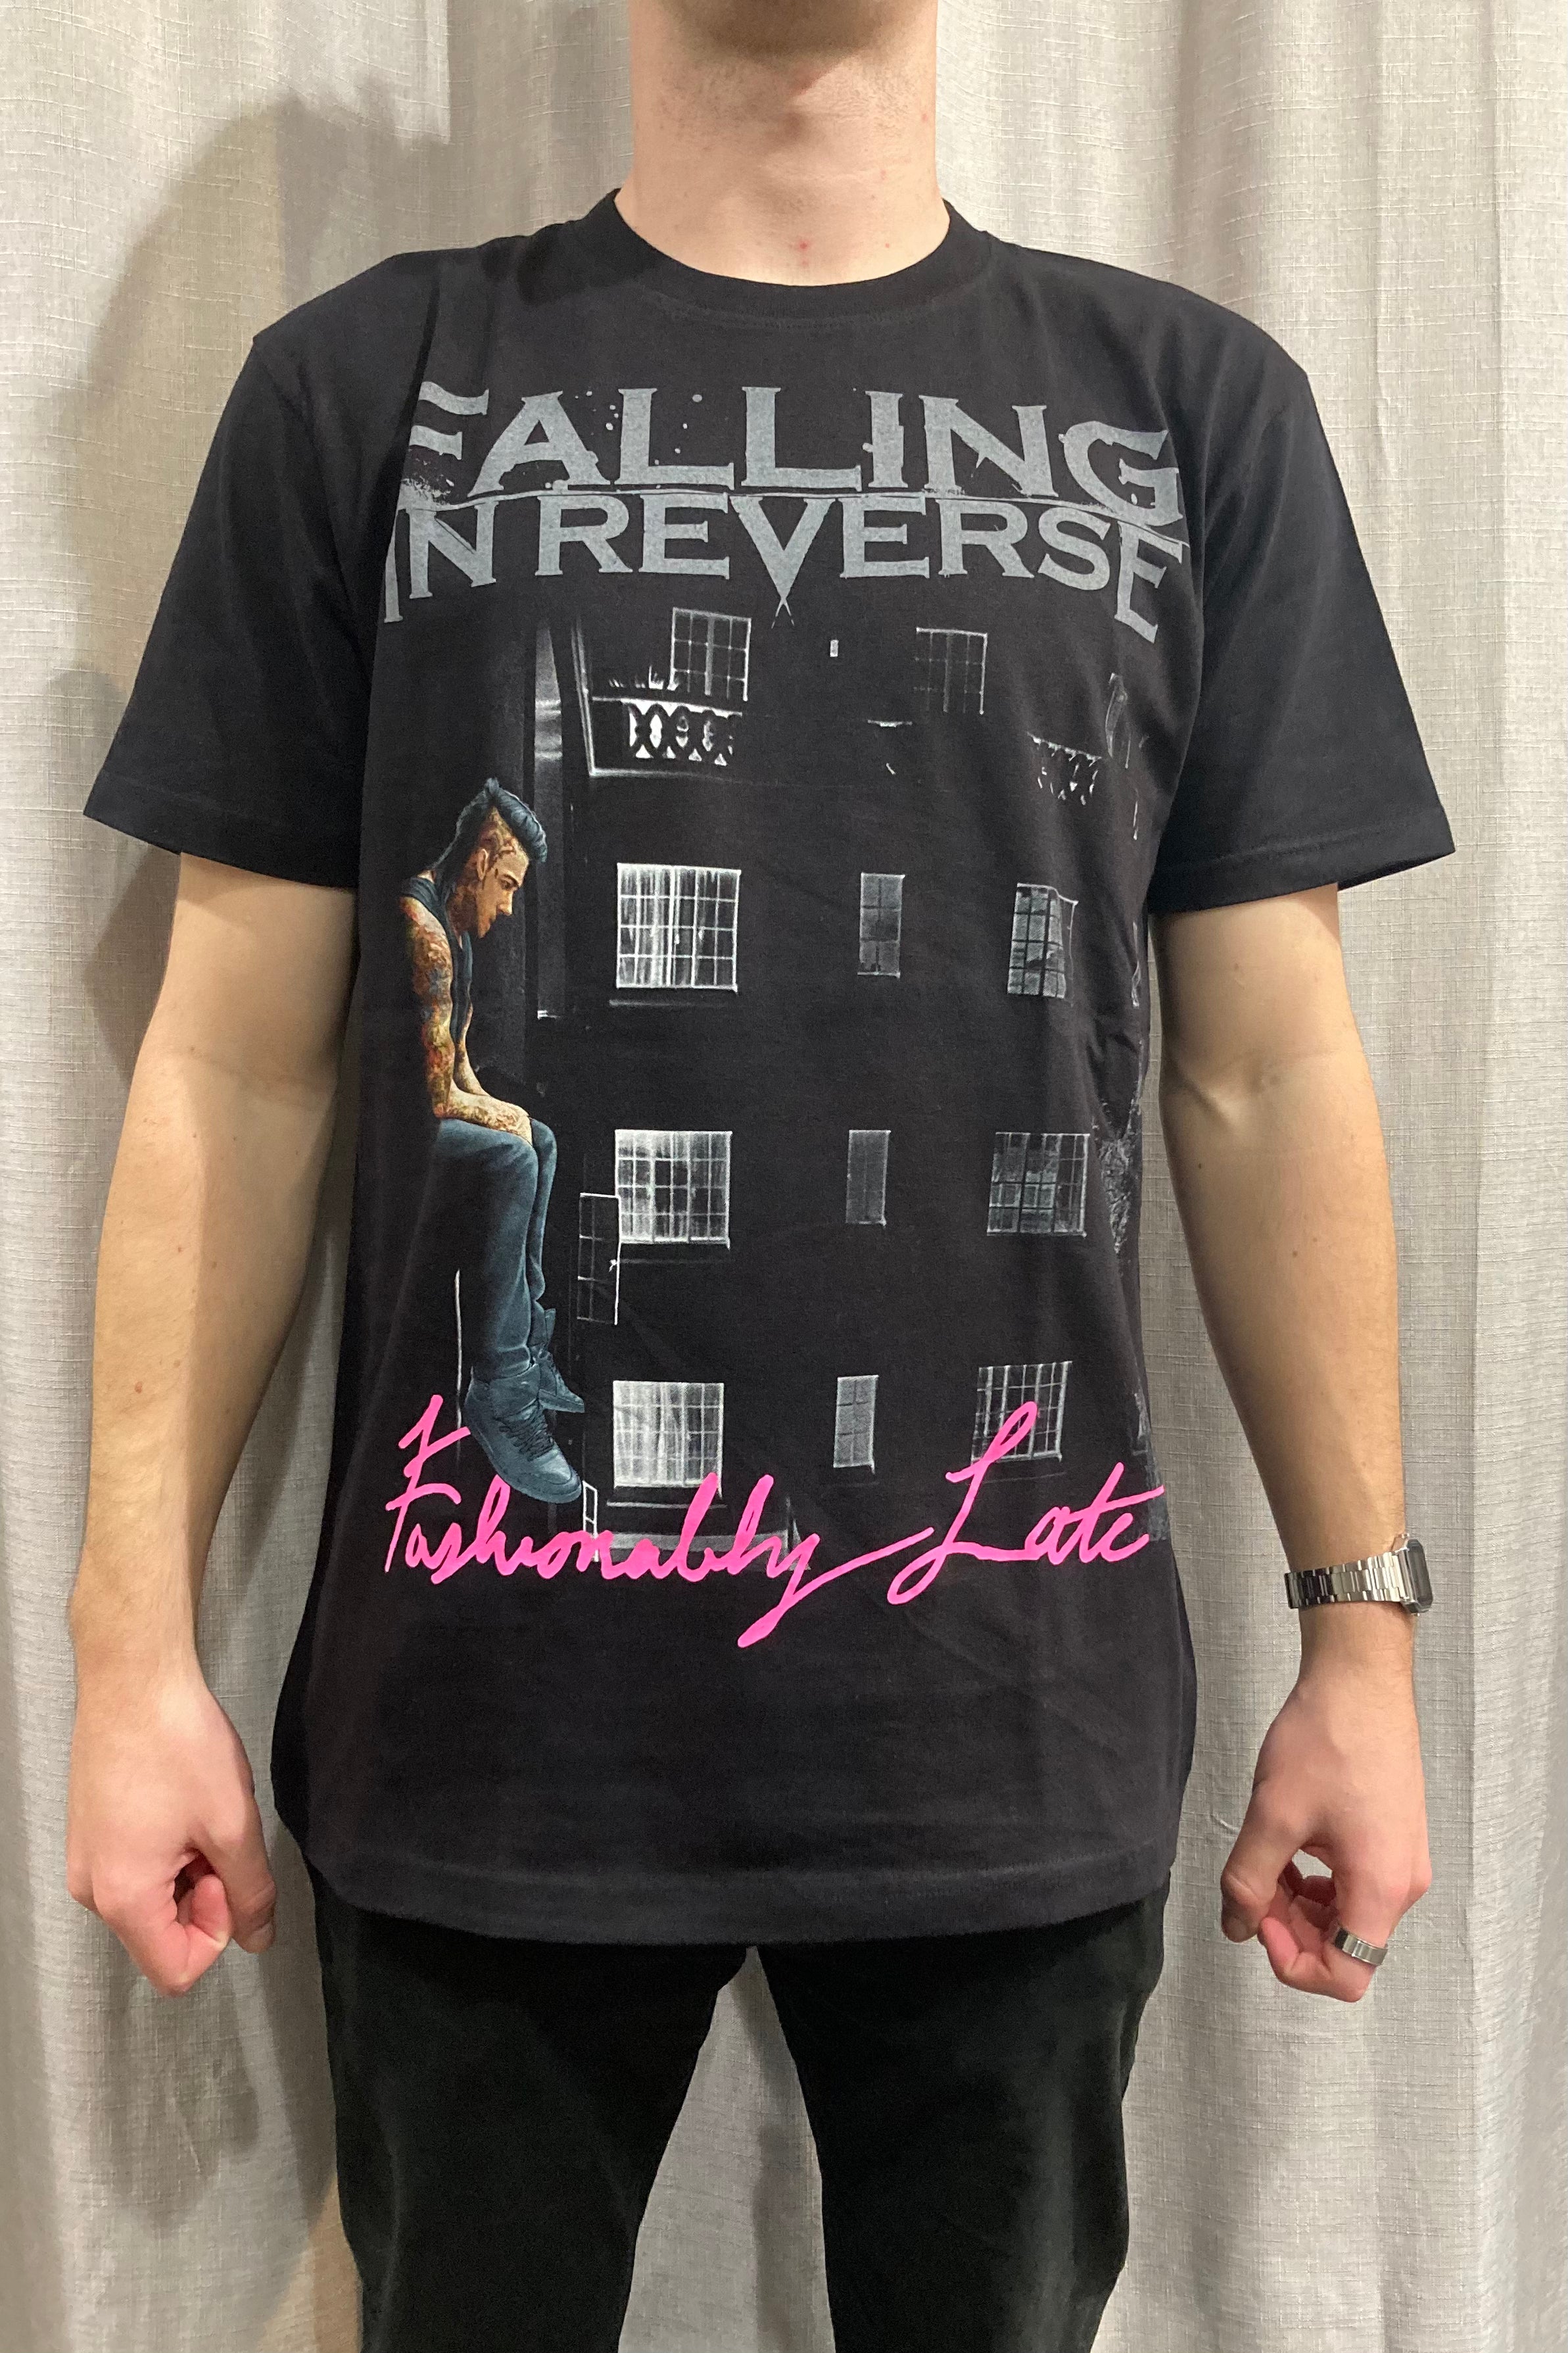 Fashionably Late Album - Falling In Reverse T-Shirts